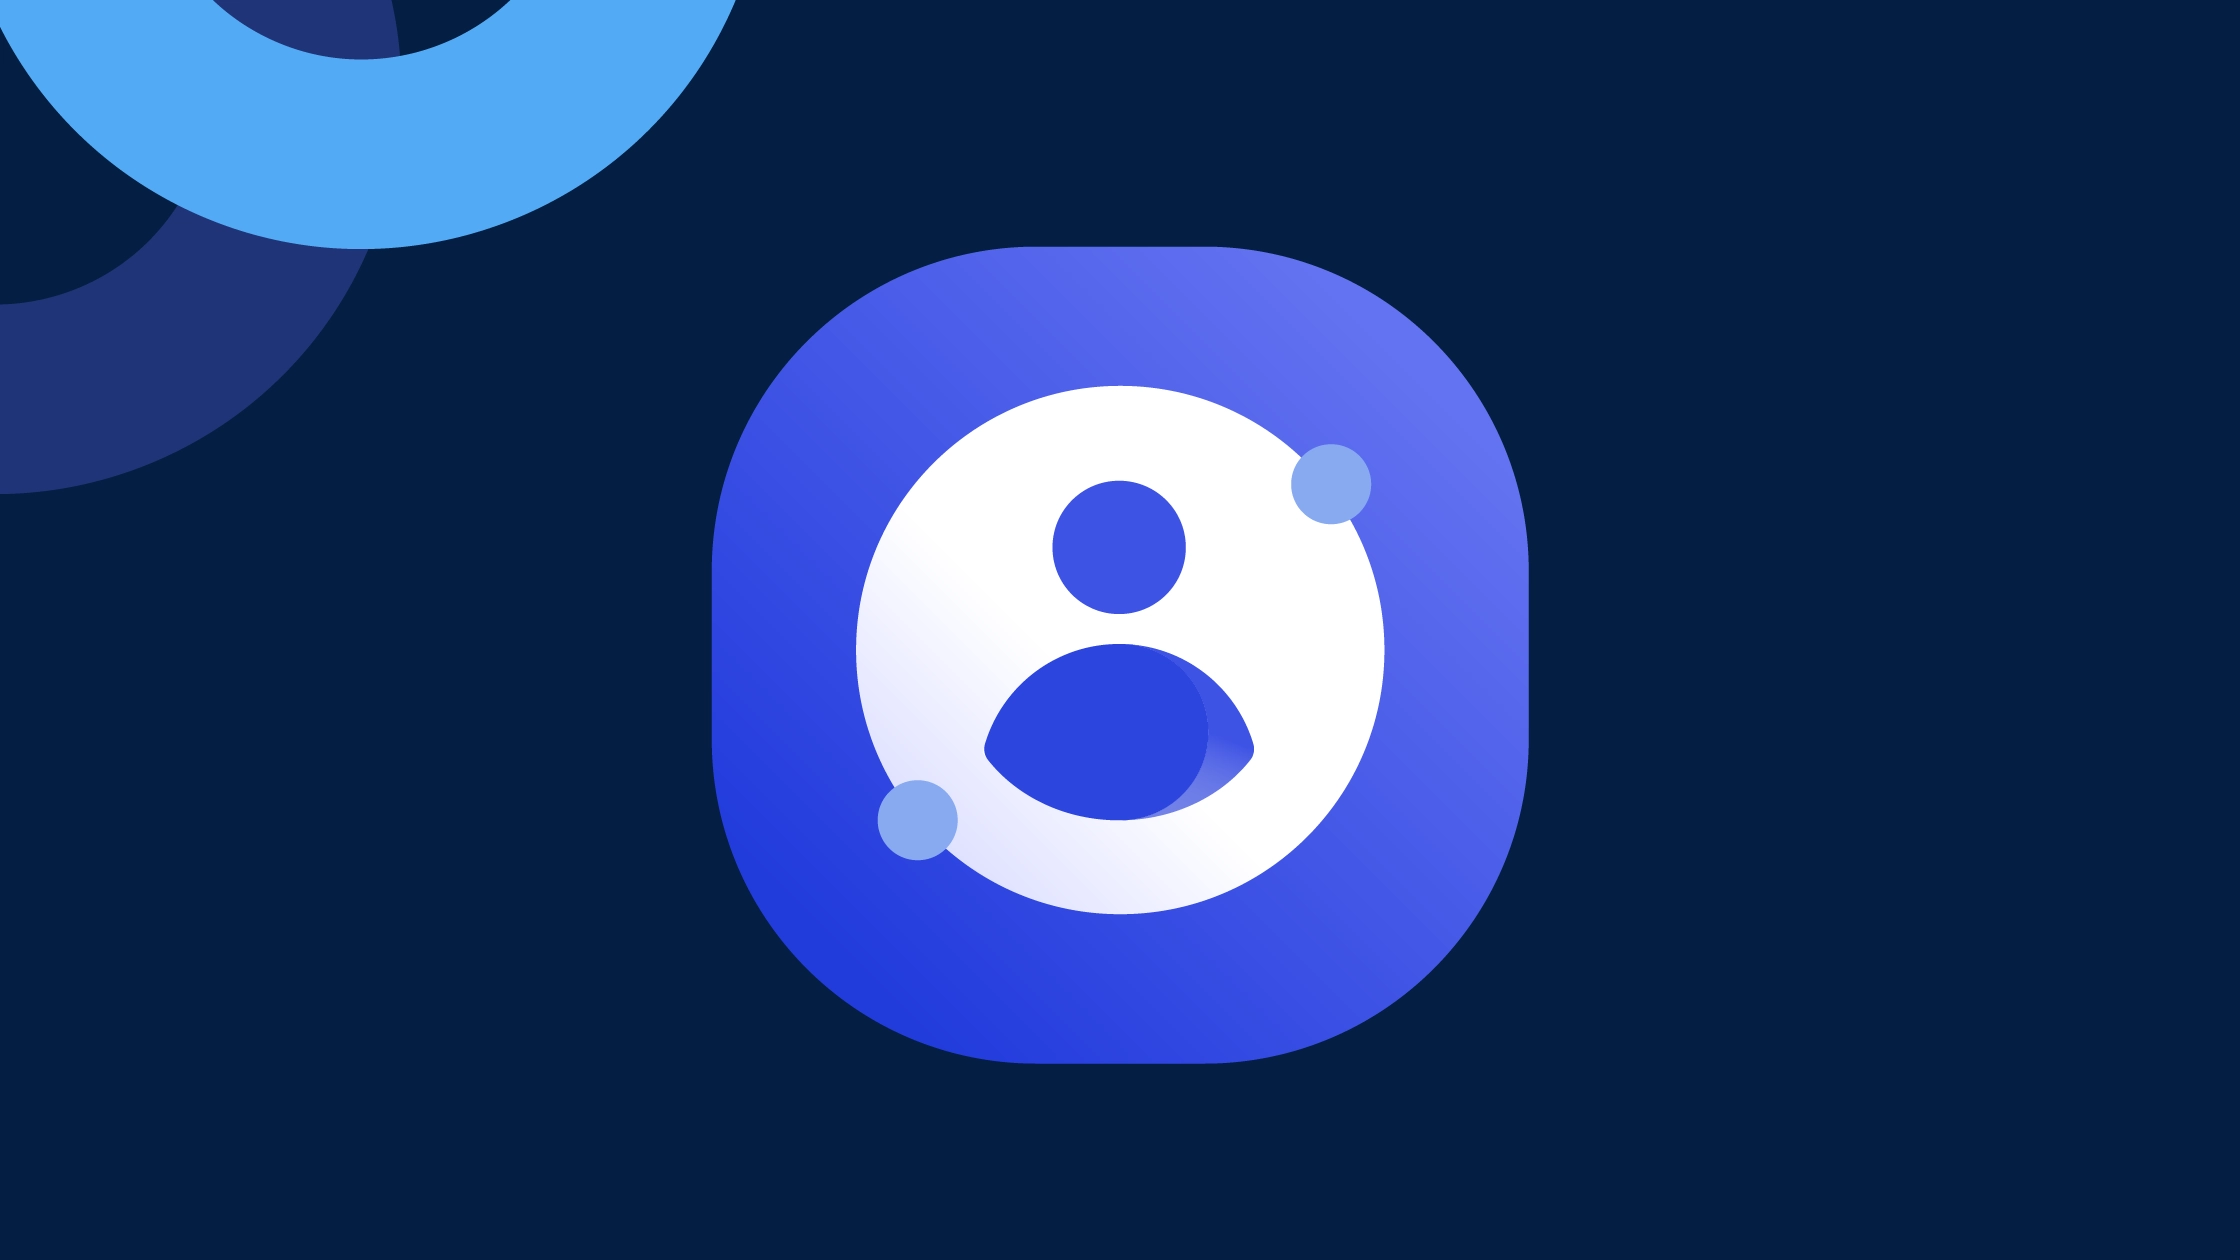 Samsung Customization service app logo on a circle in a navy background